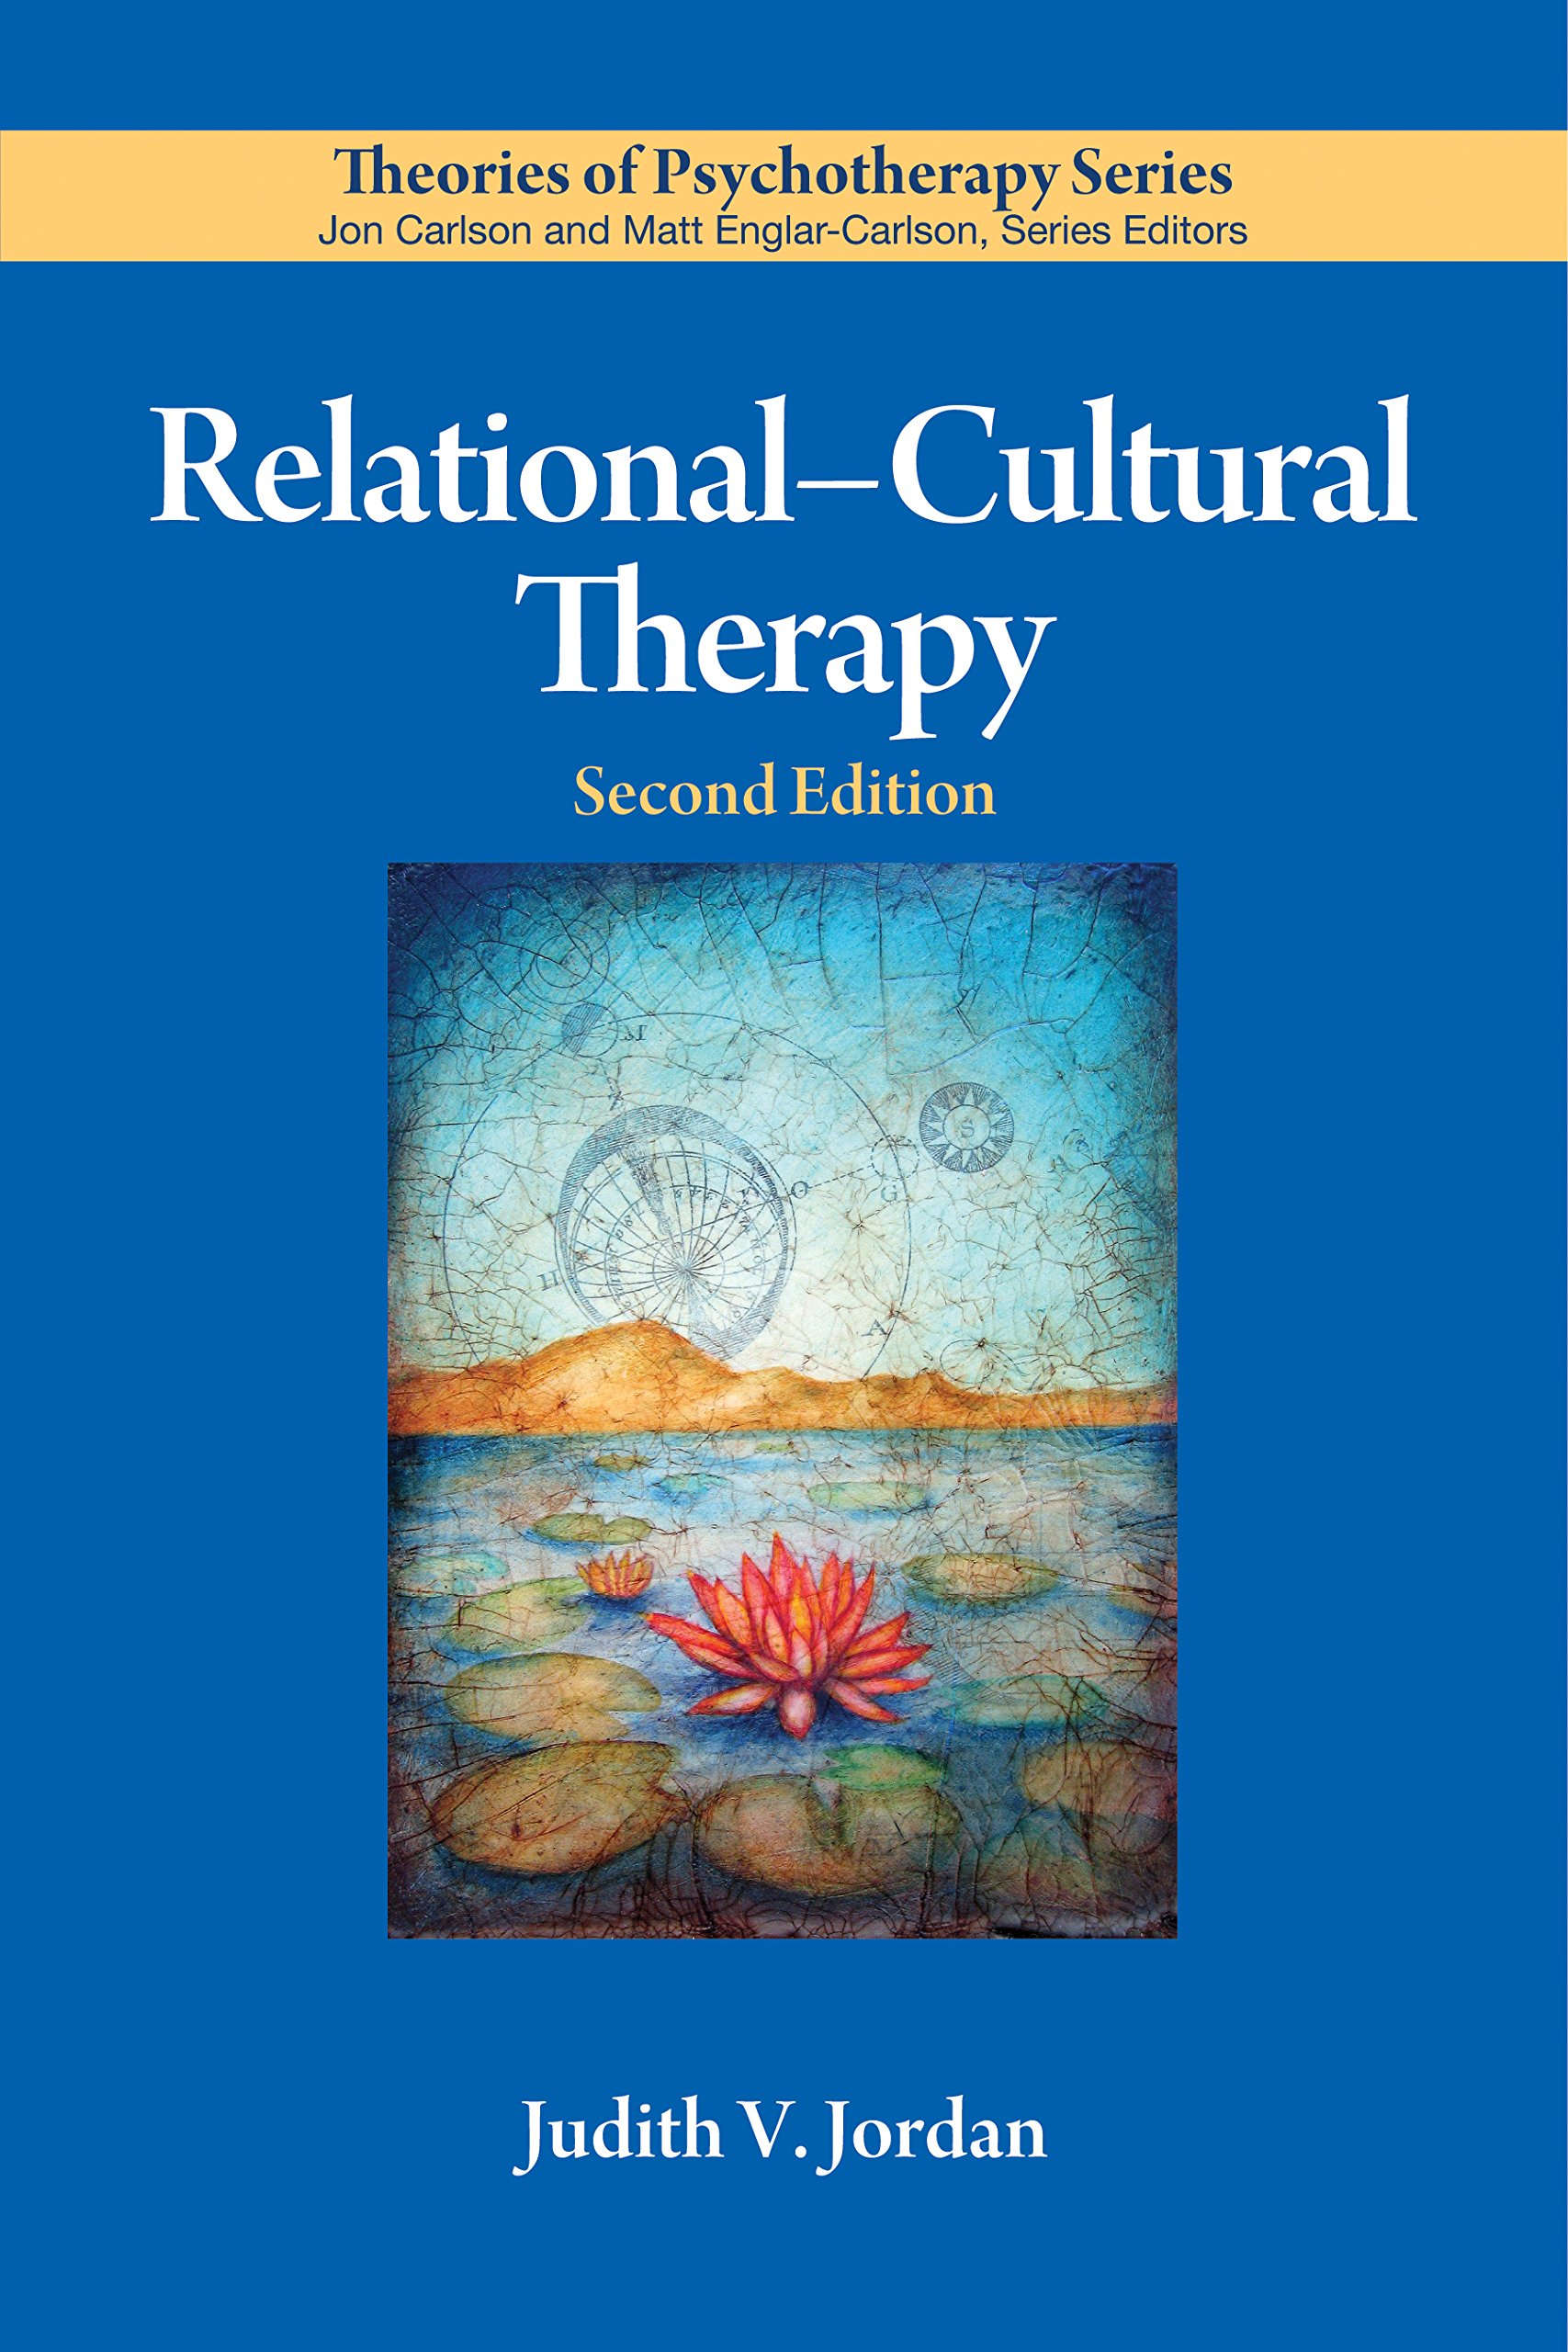 Relational-Cultural Theory